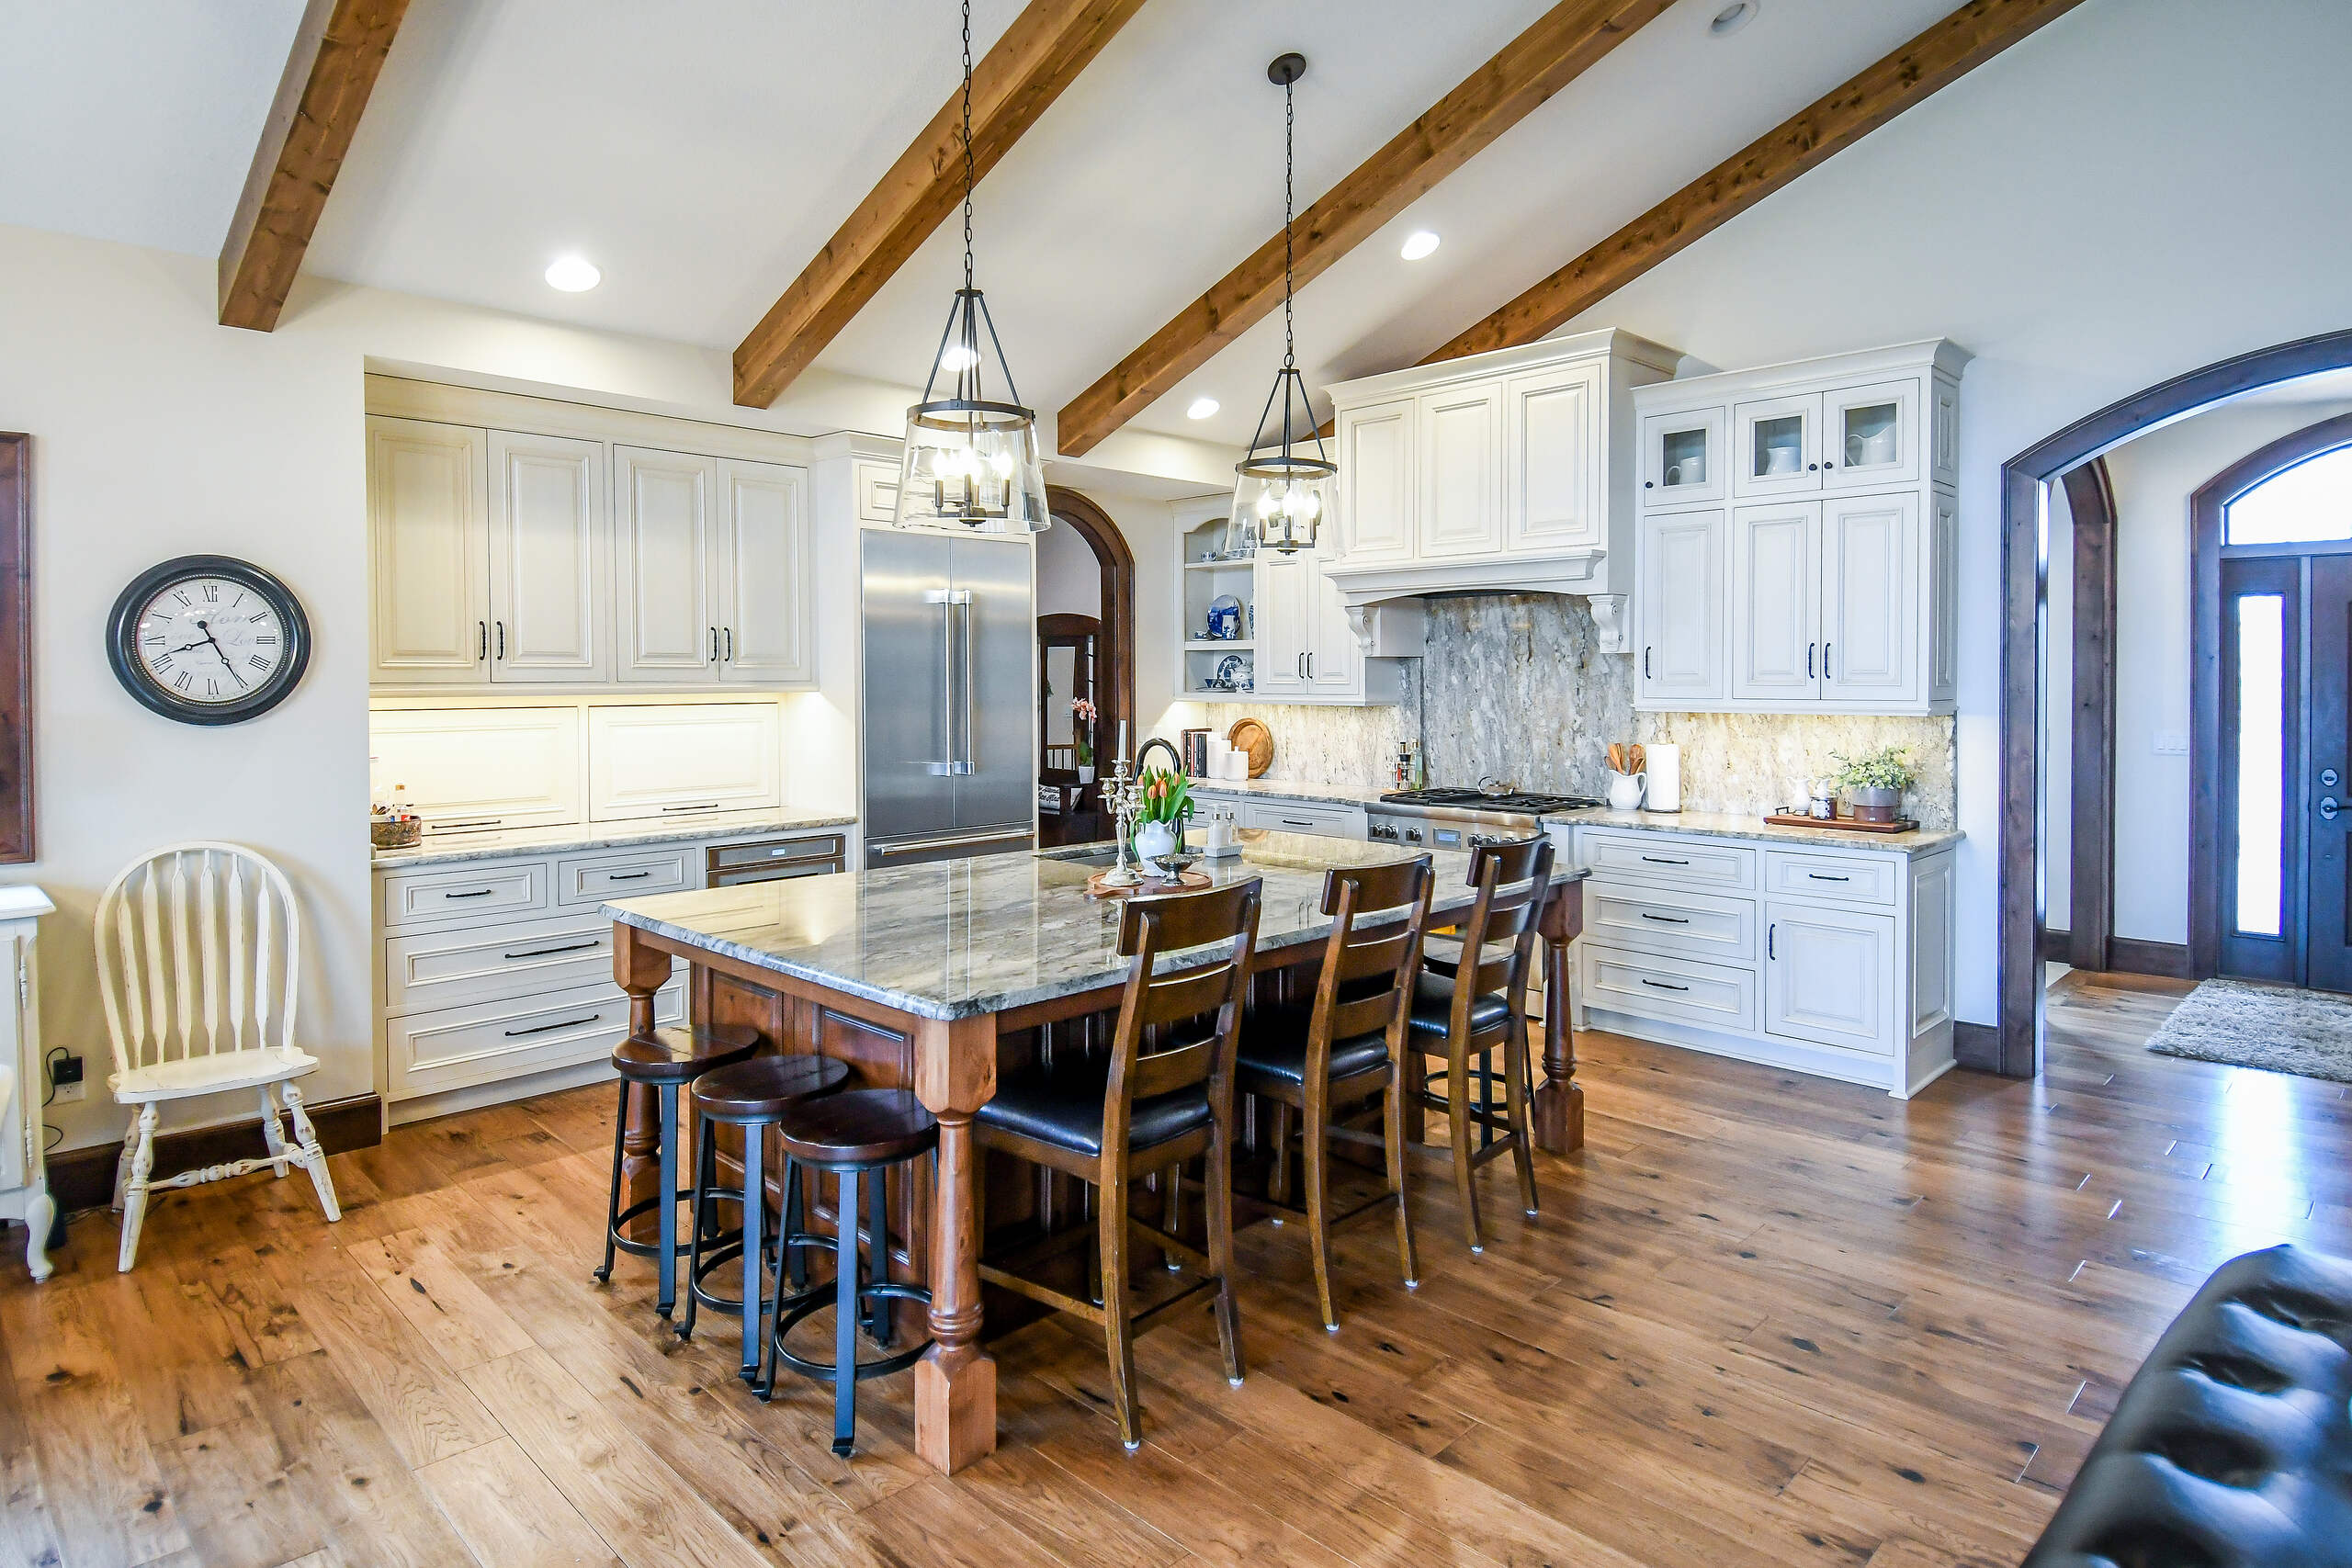 Spacious kitchen with rustic charm featuring white cabinetry, a stone backsplash, marble countertops, and an inviting wooden dining table set under elegant lighting.